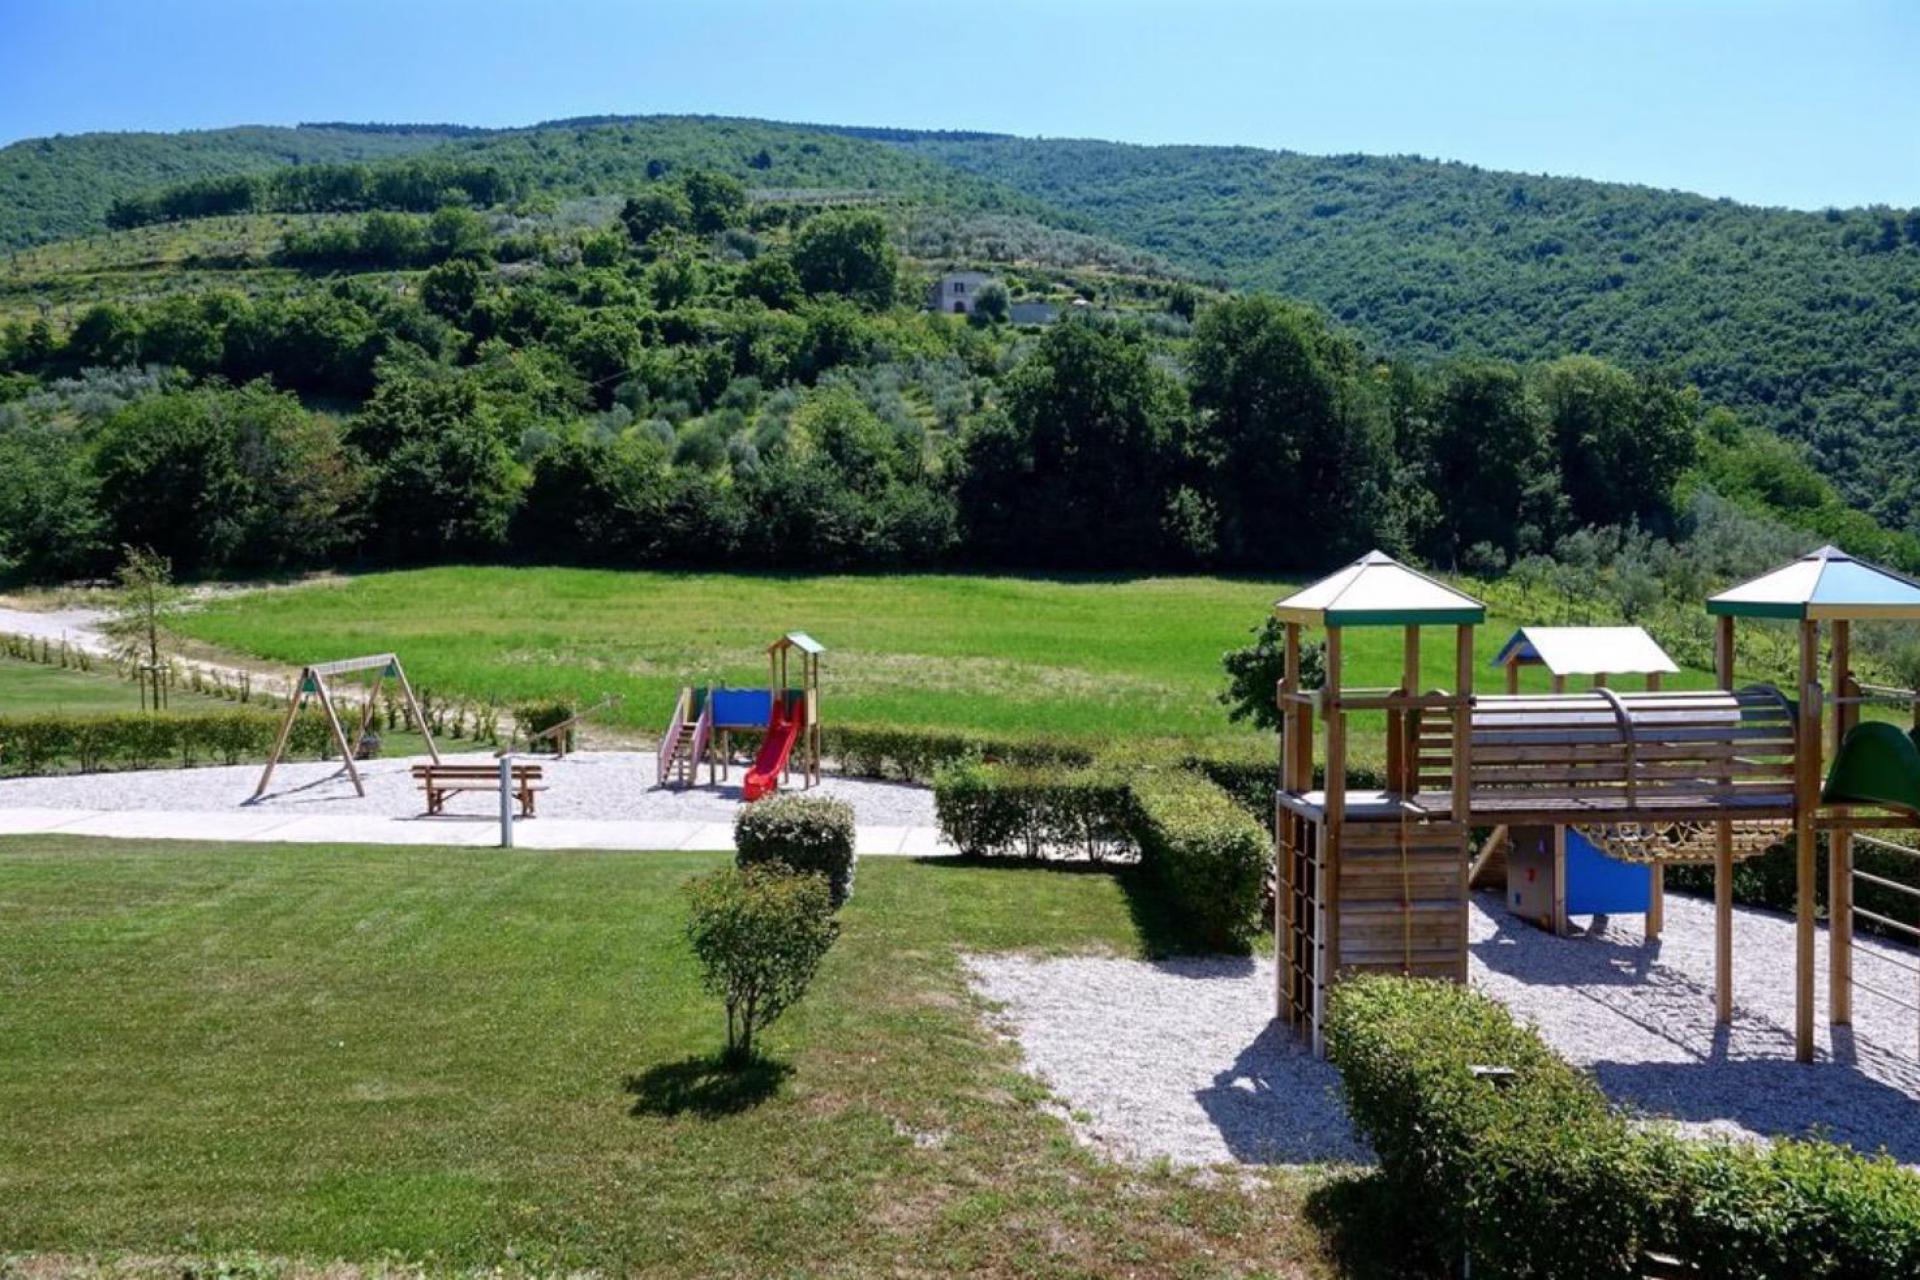 Family-friendly resort in the heart of Umbria